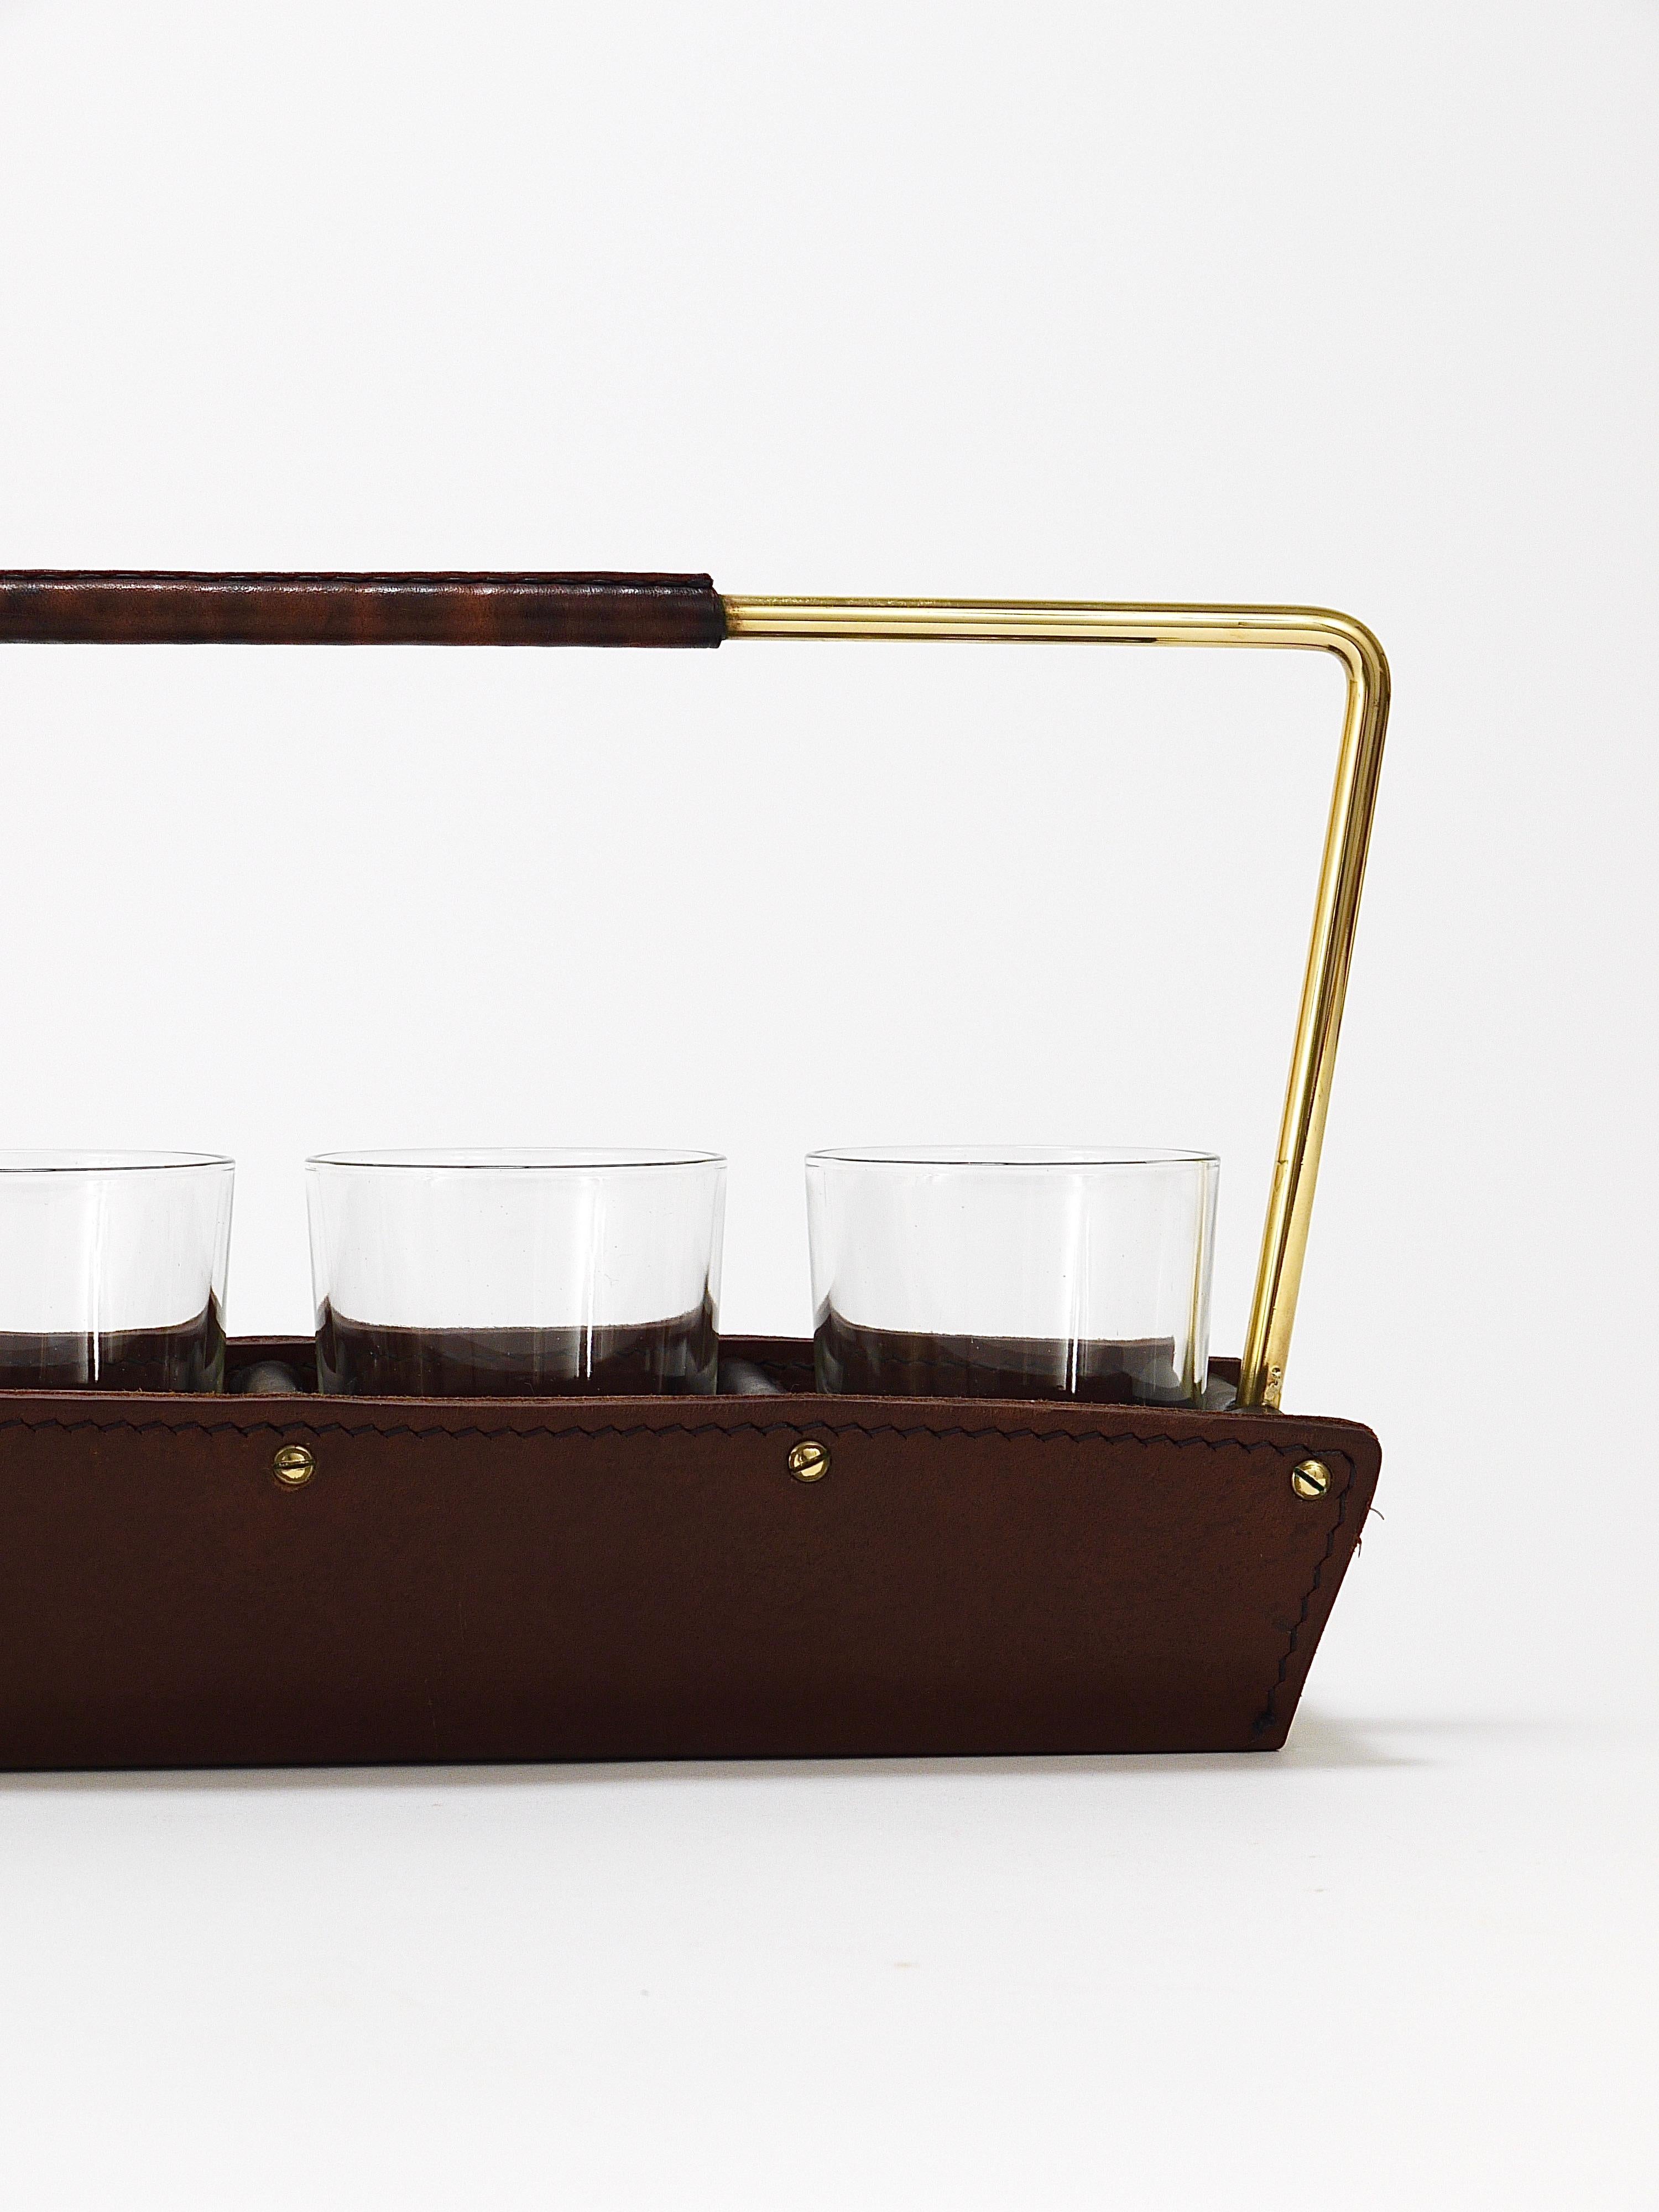 Carl Auböck II Drinking Glass Carrying Rack, Leather & Brass, Austria 1950s For Sale 7